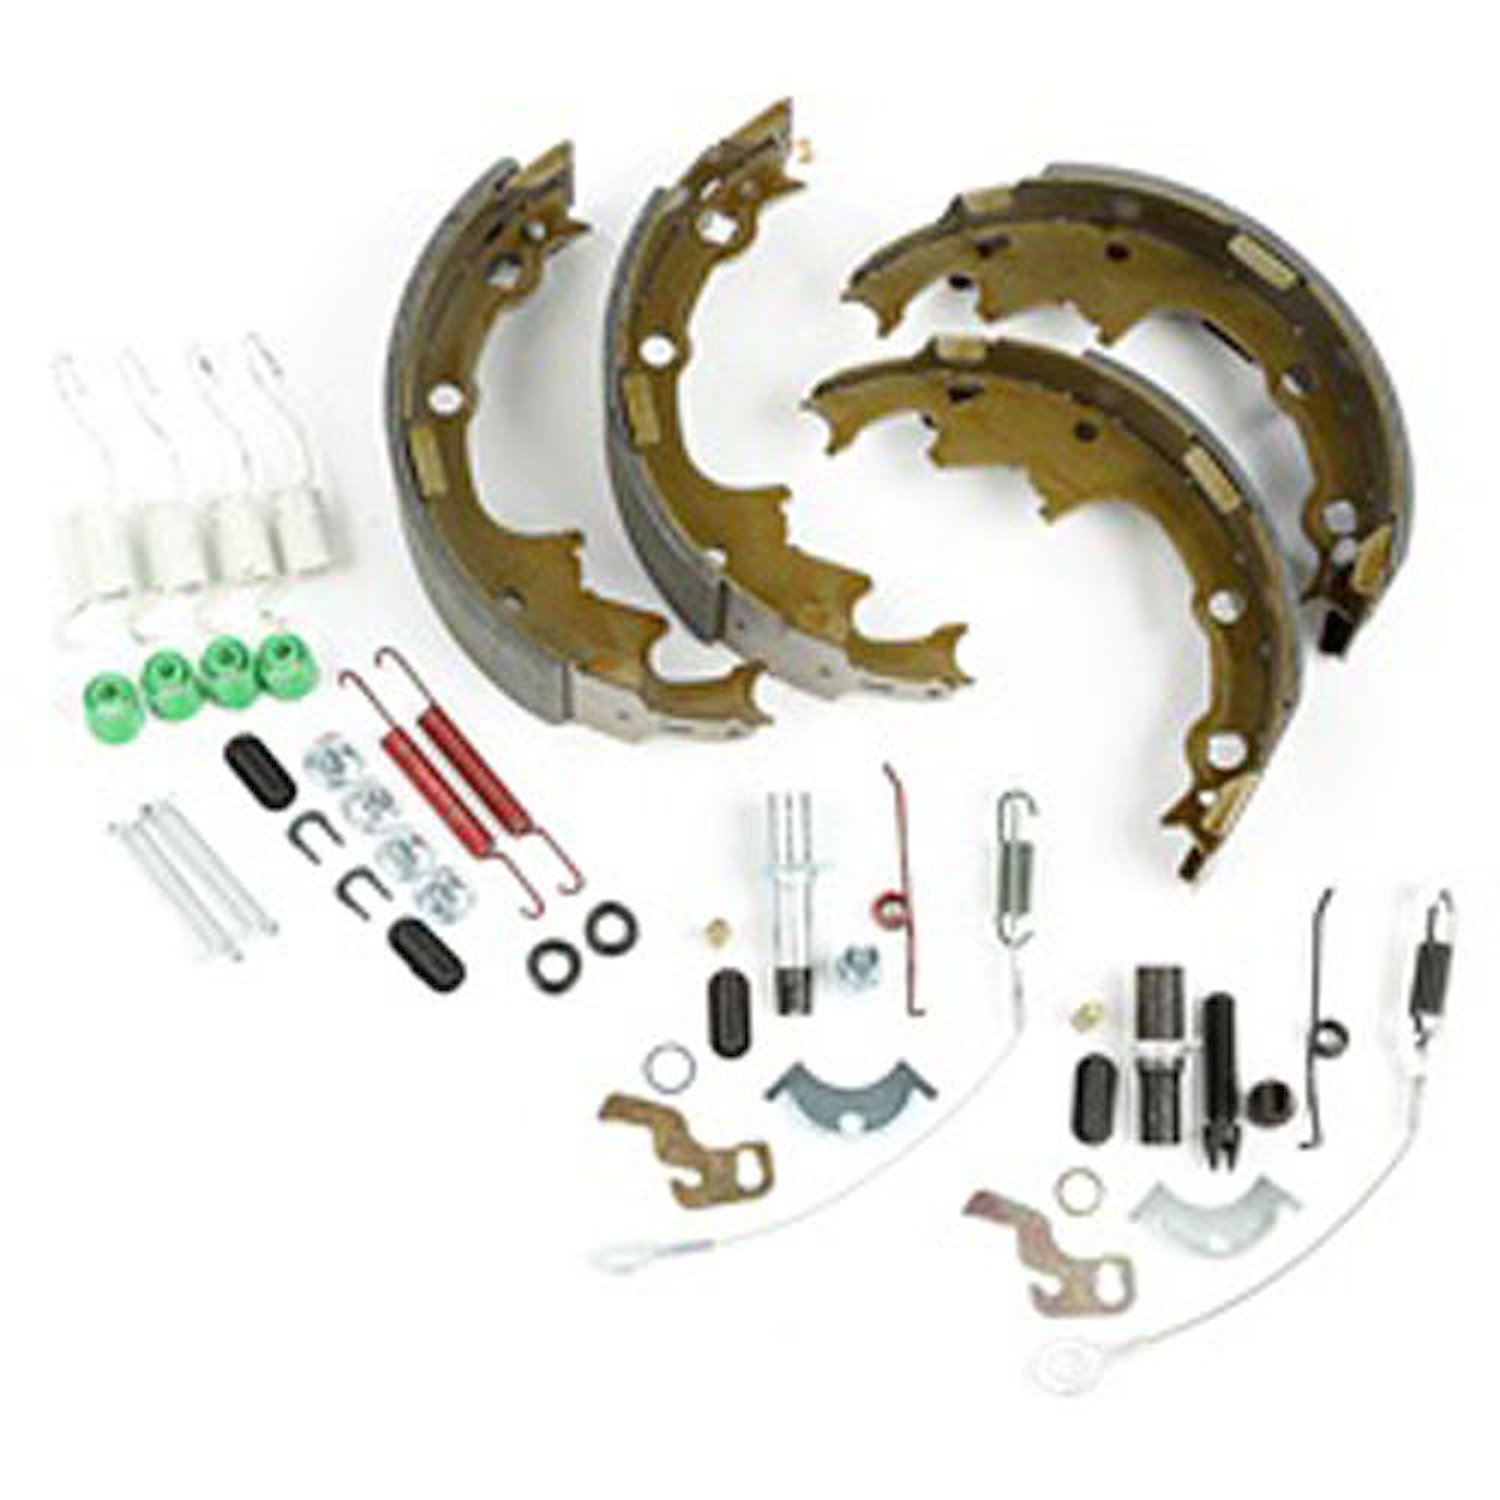 This drum brake service kit from Omix-ADA fits